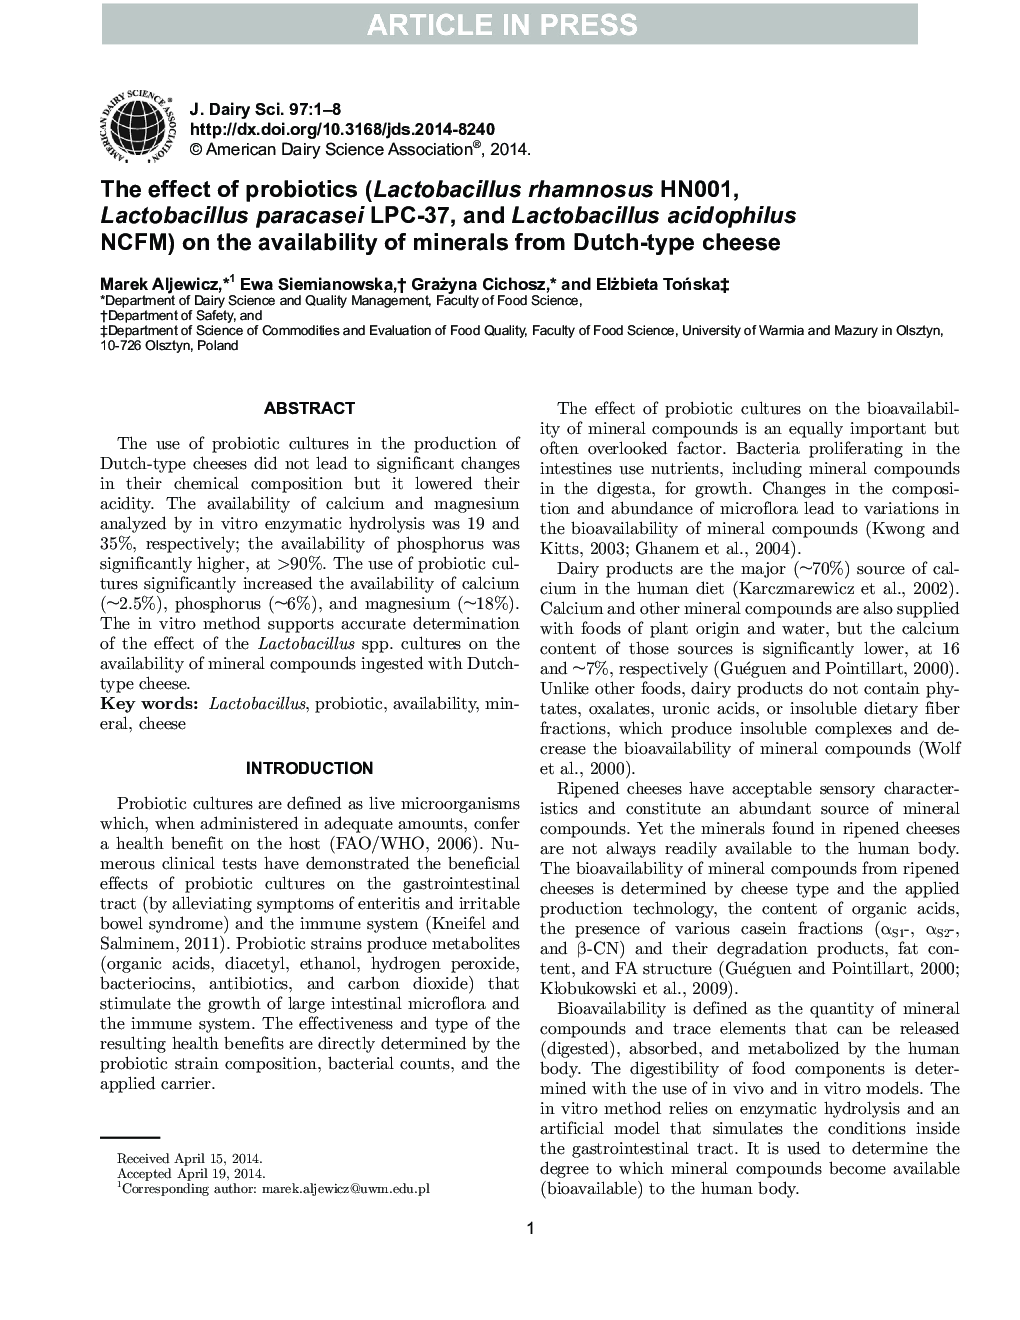 The effect of probiotics (Lactobacillus rhamnosus HN001, Lactobacillus paracasei LPC-37, and Lactobacillus acidophilus NCFM) on the availability of minerals from Dutch-type cheese